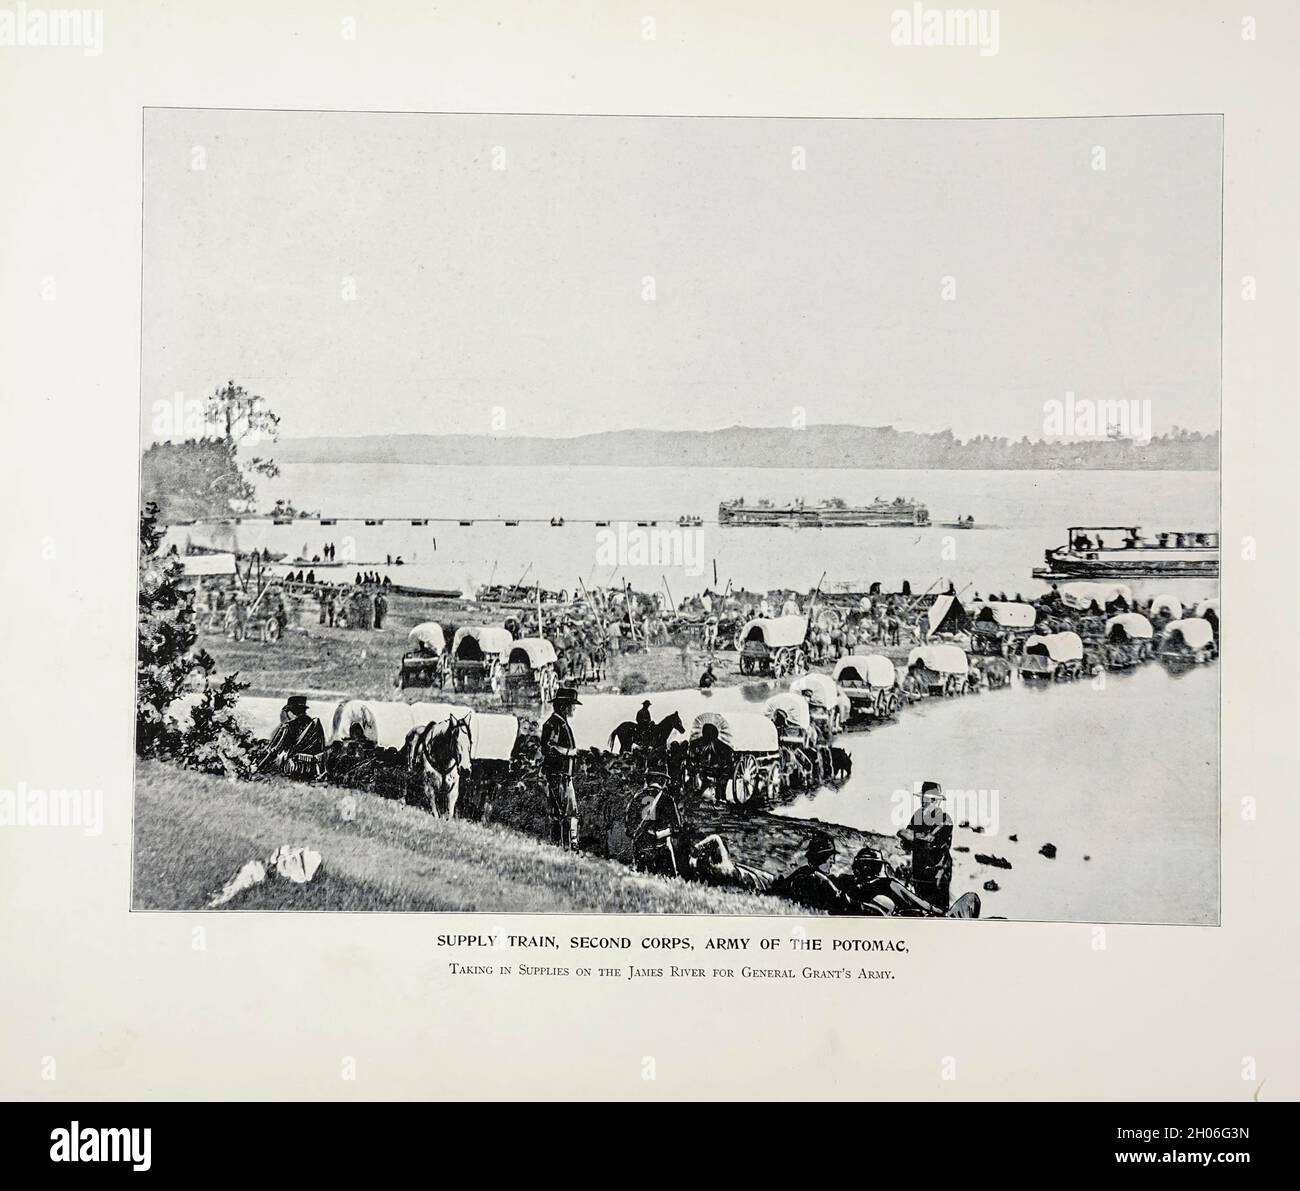 SUPPLY TRAIN, SECOND CORPS, ARMY OF THE POTOMAC Taking in Supplies on the James River for General Grant’s Army. from The American Civil War book and Grant album : 'art immortelles' : a portfolio of half-tone reproductions from rare and costly photographs designed to perpetuate the memory of General Ulysses S. Grant, depicting scenes and incidents in connection with the Civil War Published  in Boston and New York by W. H. Allen in 1894 Stock Photo